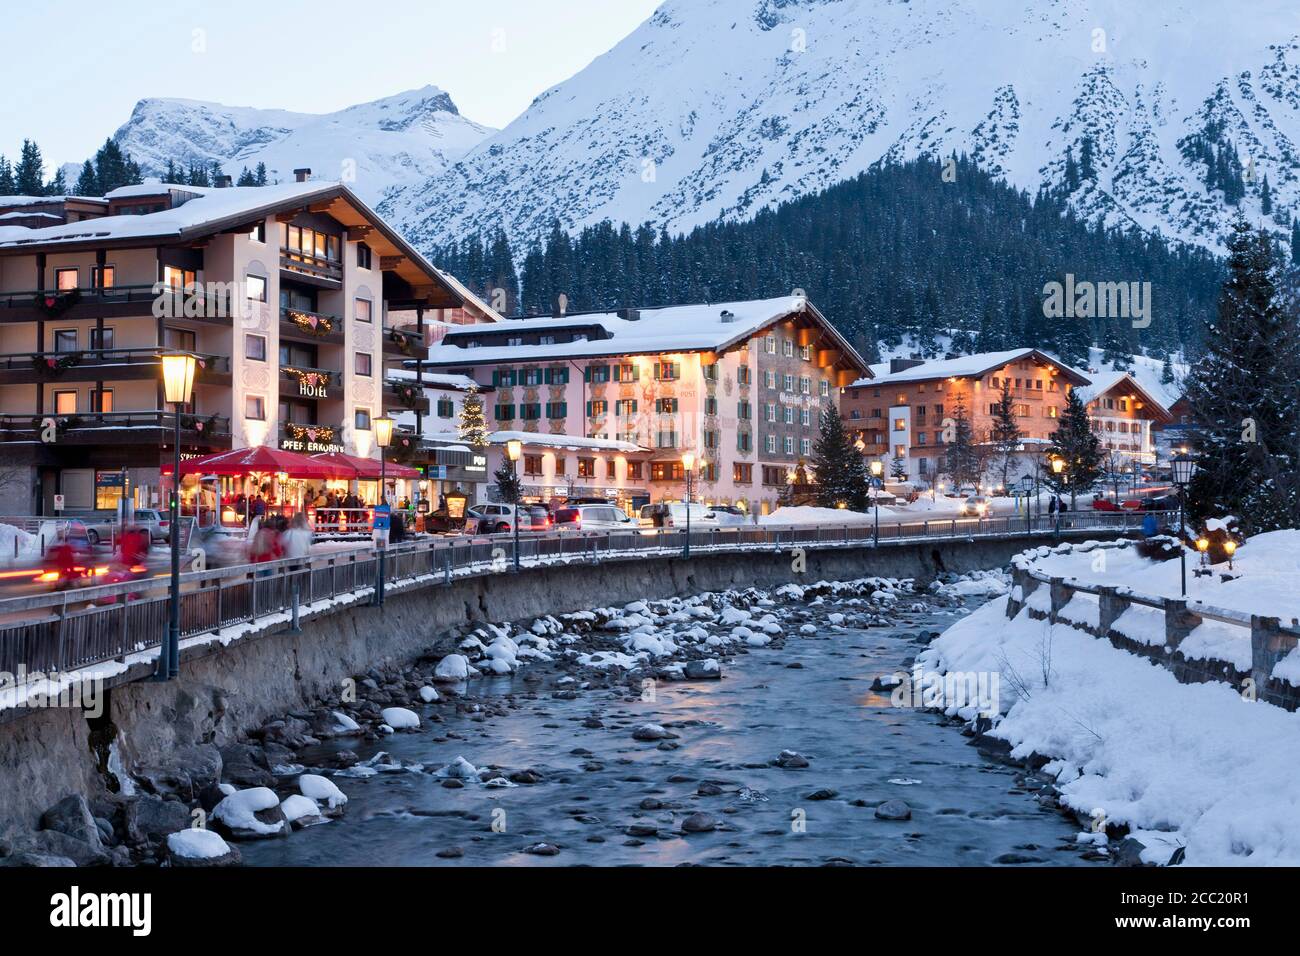 Austria, Vorarlberg, Lech am Arlberg, View of hotels and Lech river in  winter Stock Photo - Alamy